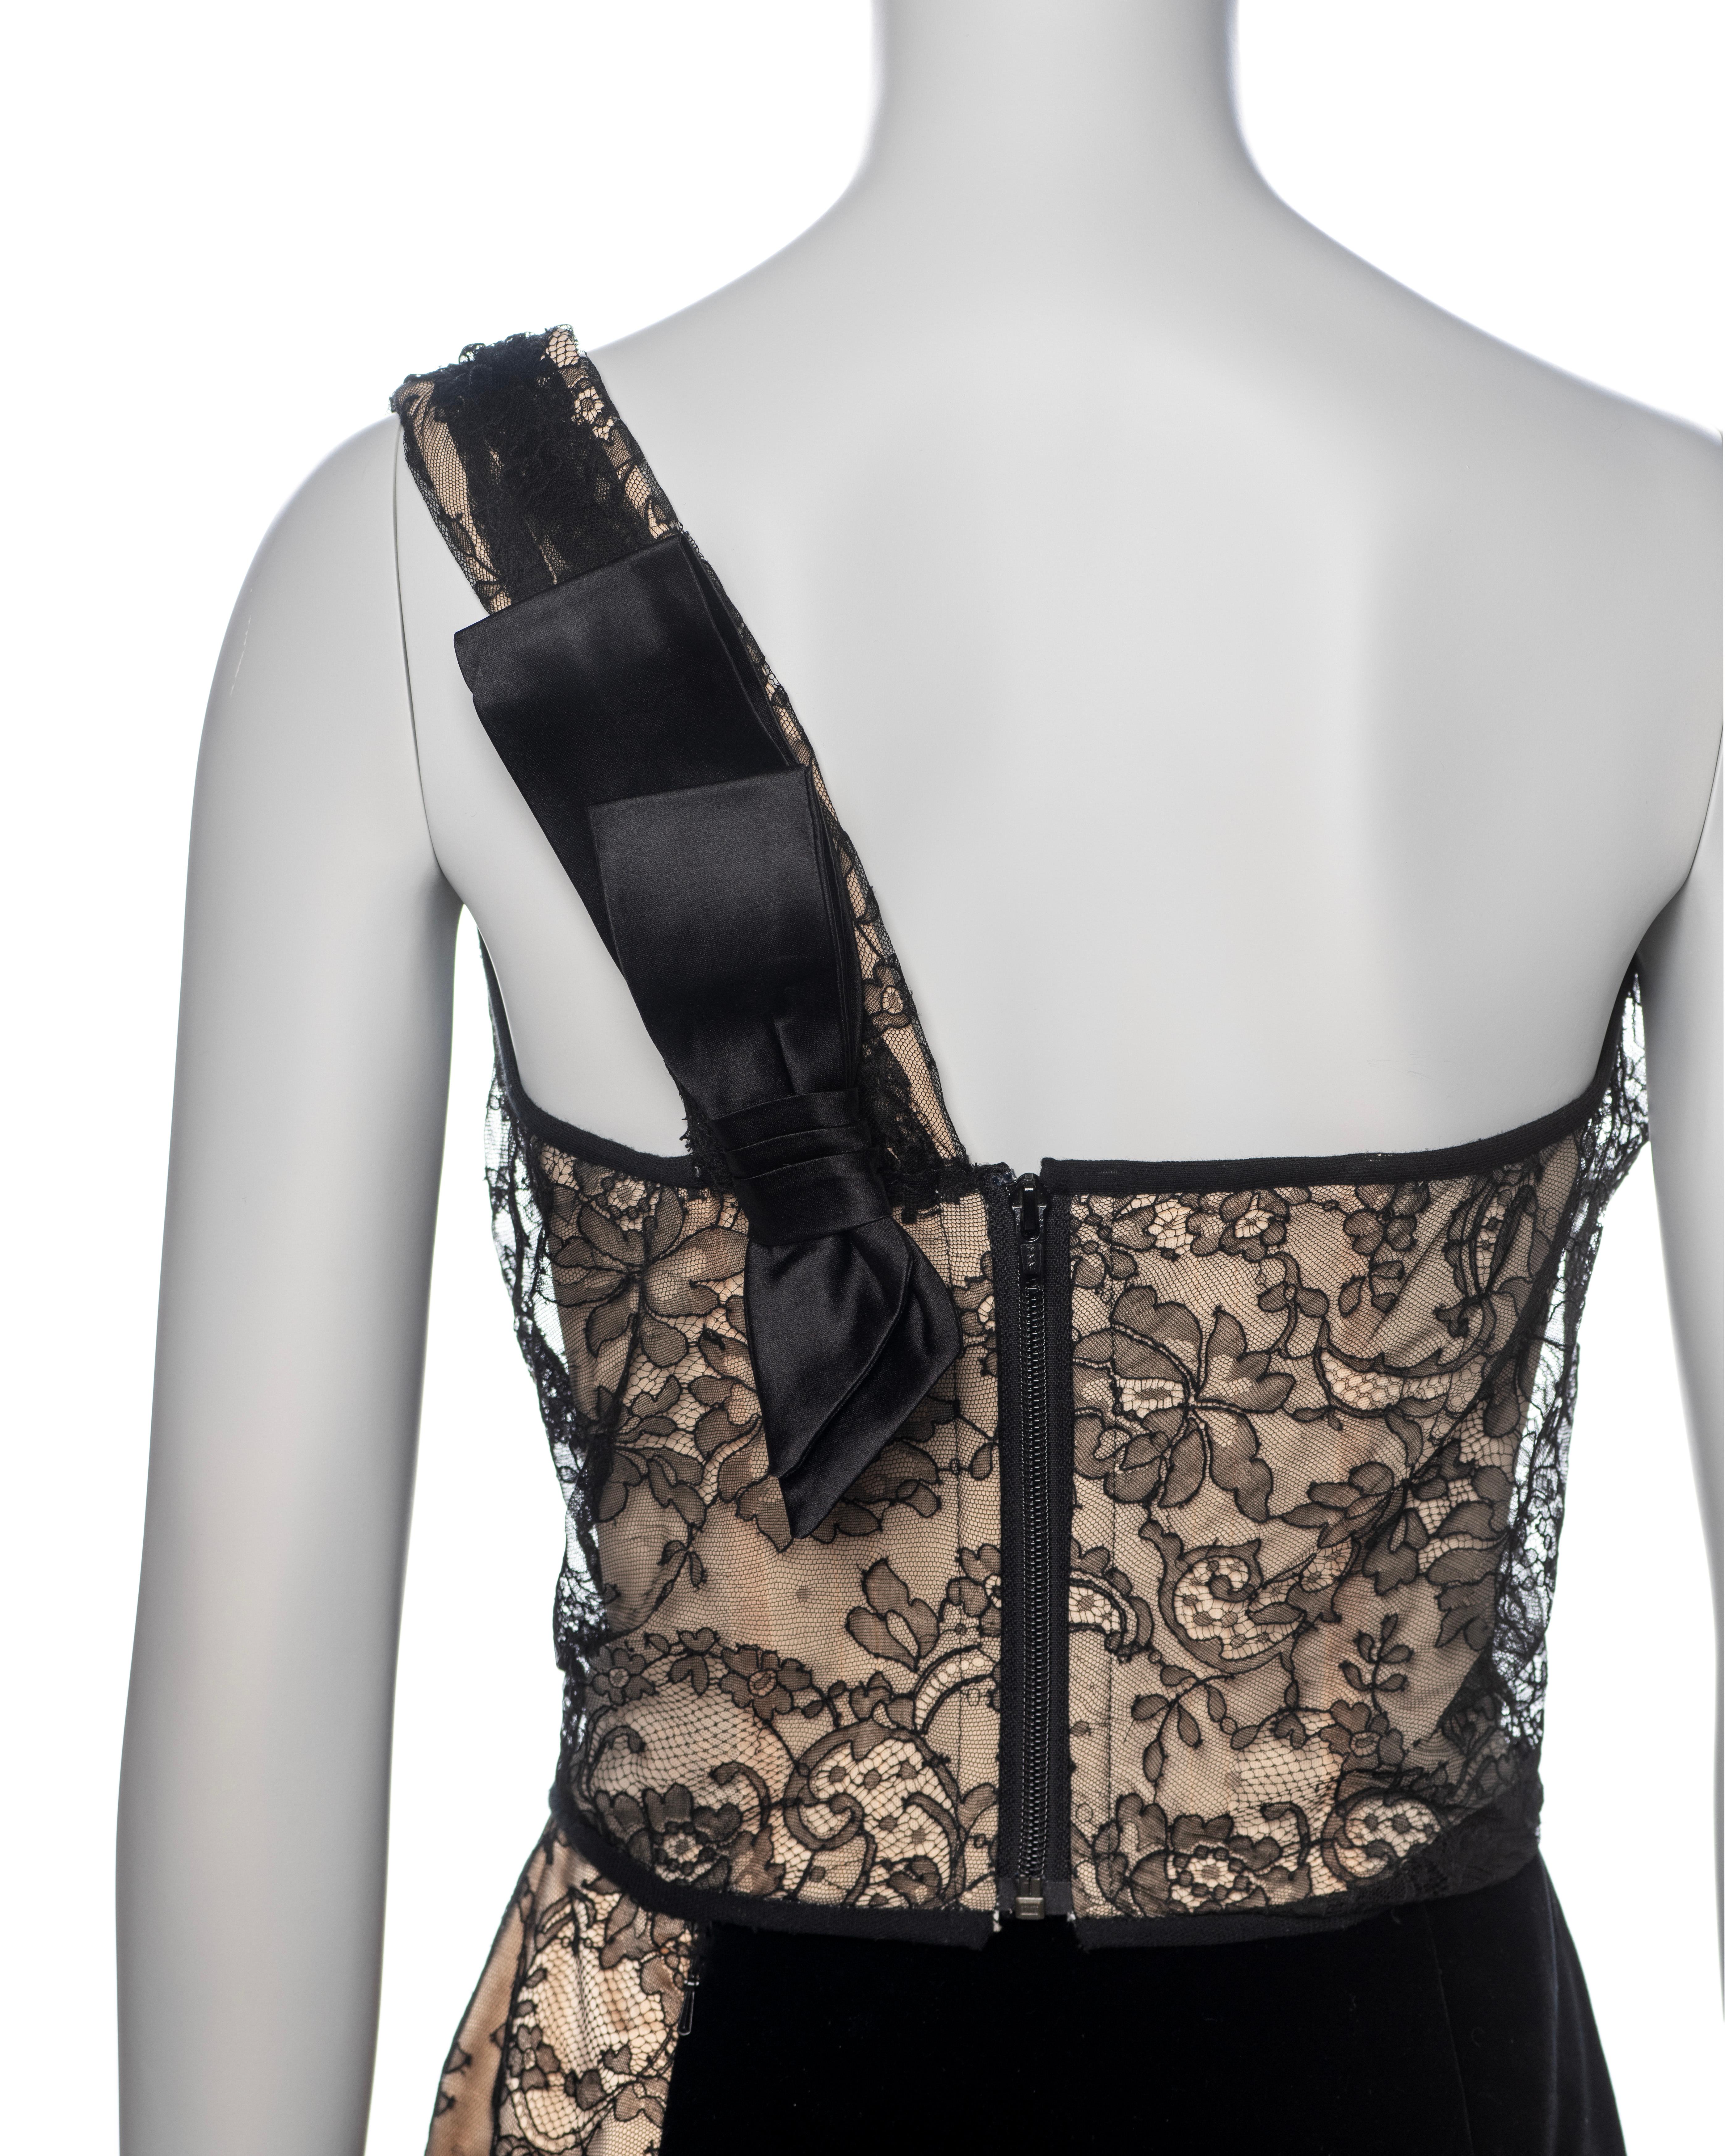 Vivienne Westwood Nude Satin, Black Lace and Velvet Corset and Skirt, FW 1996 For Sale 5